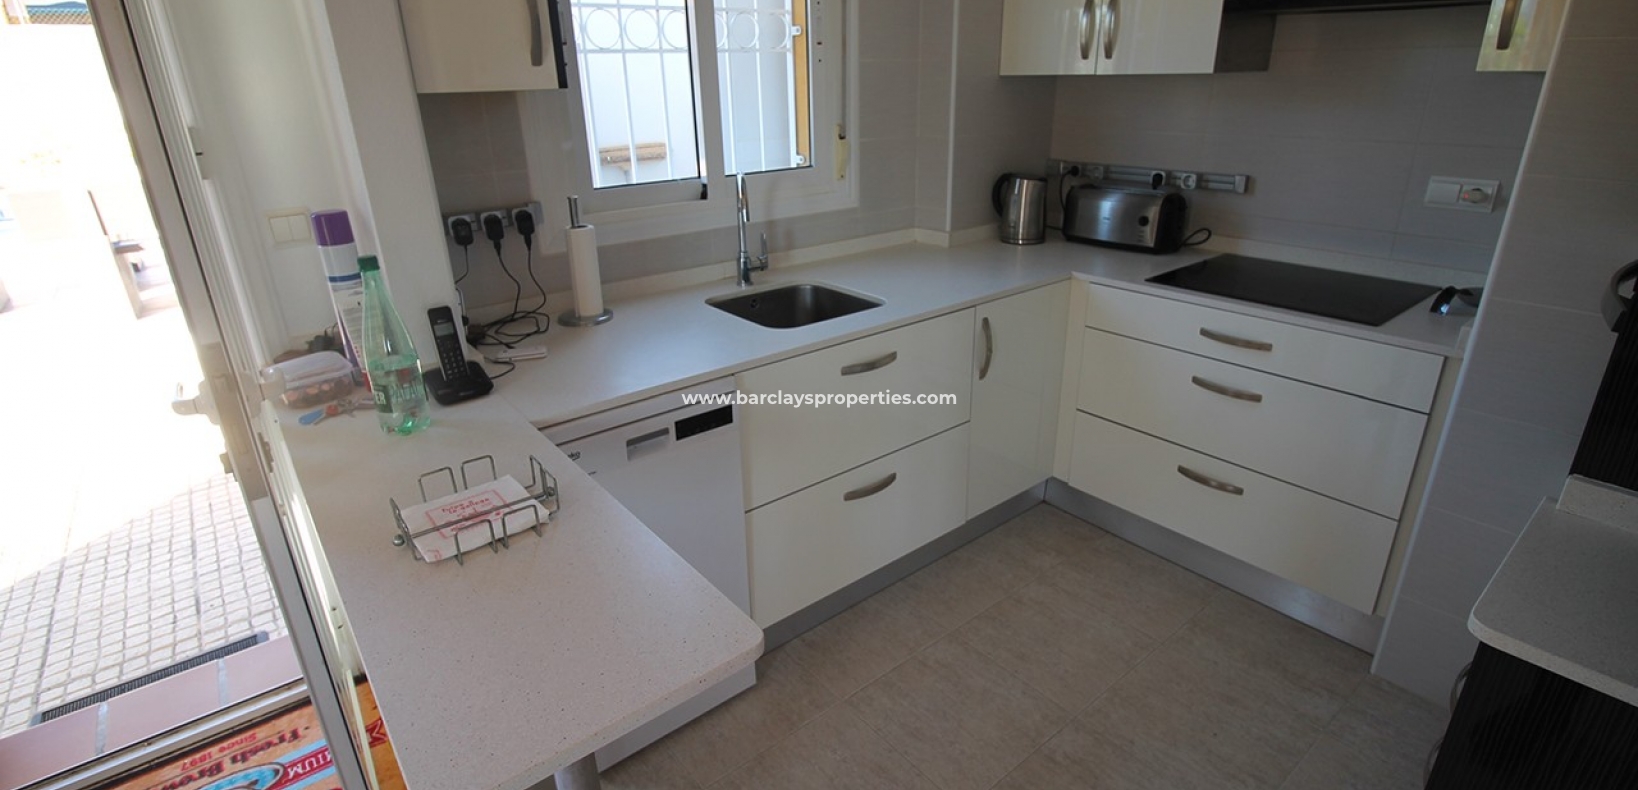 Kitchen - Detached Villa for sale in Urb. La Marina, With Pool